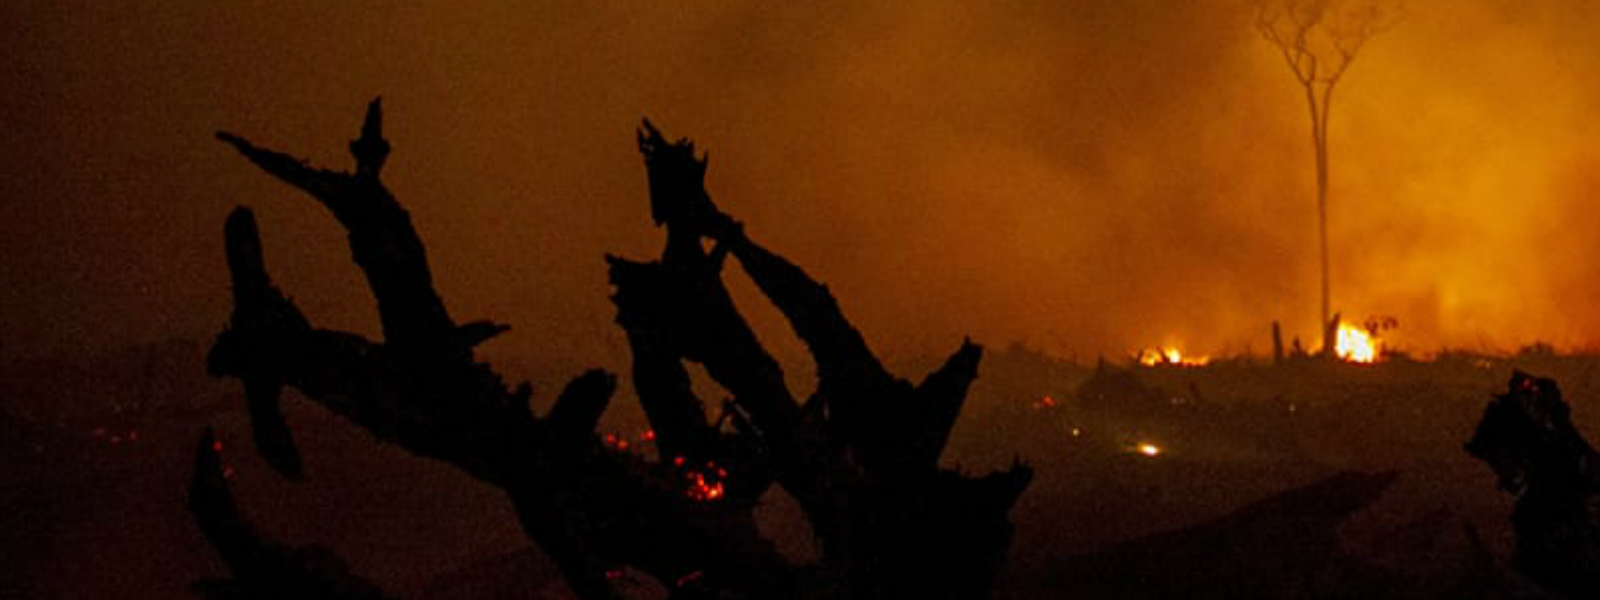 8 suspects linked to the Hagala forest fire, arrested